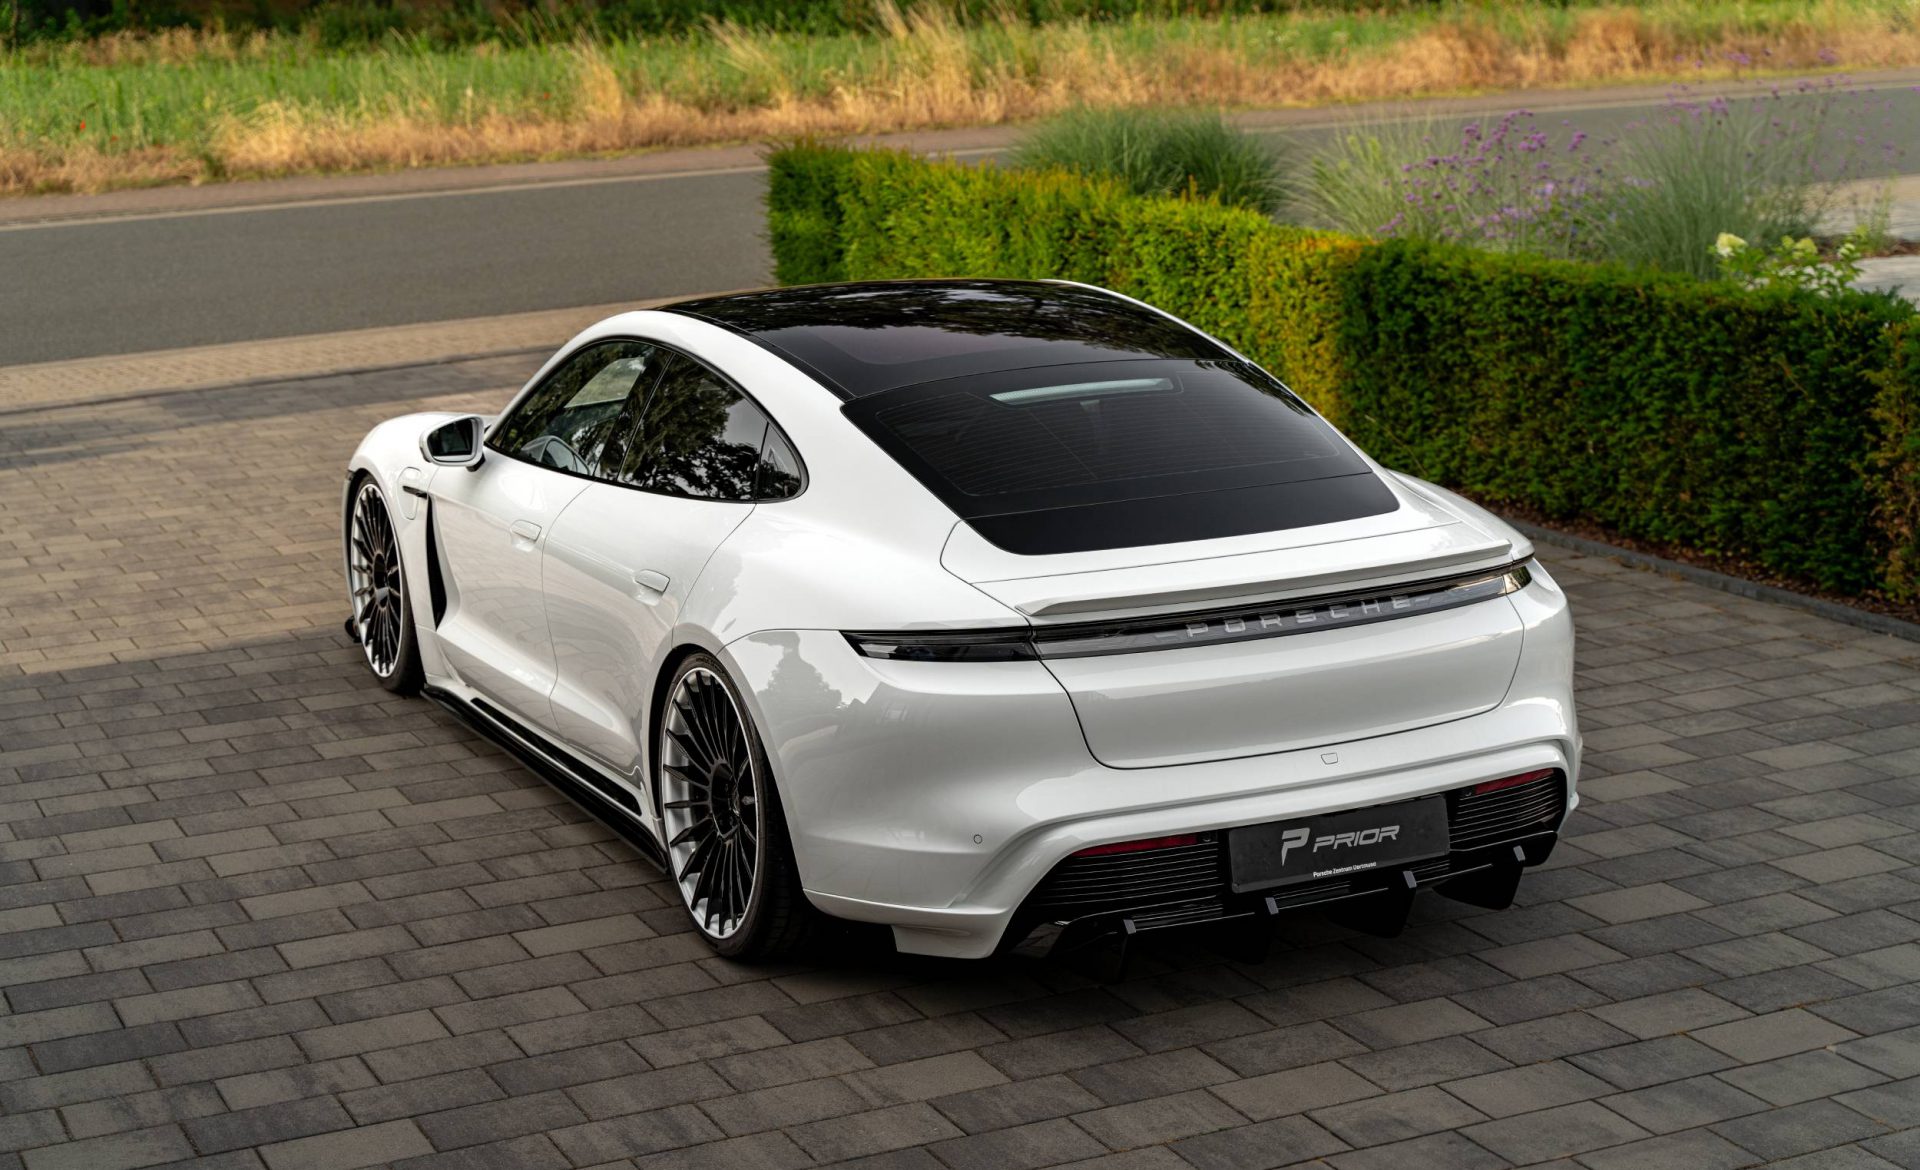 PD TE Diffusor Add-On for Porsche Taycan [2019+]